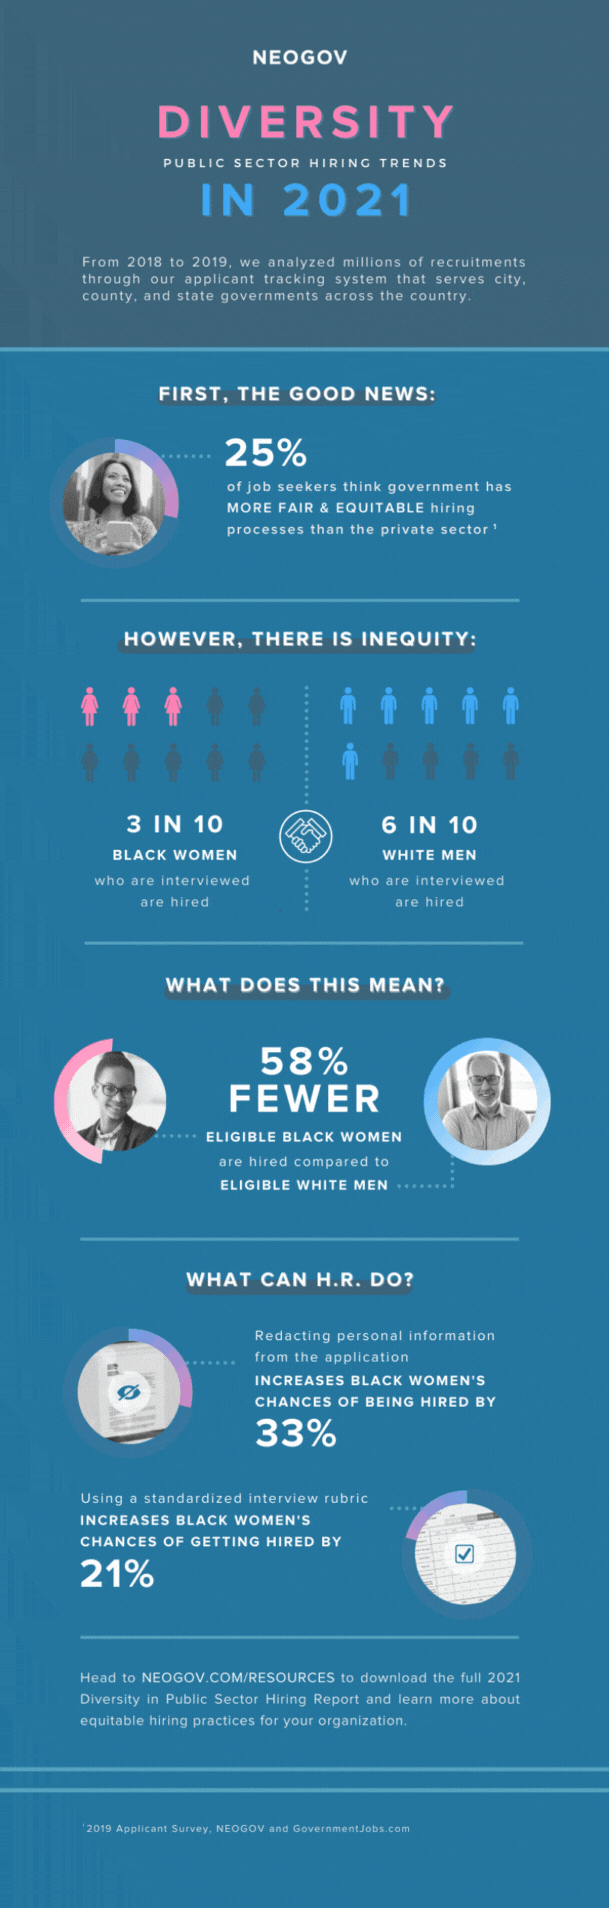 2021 Diversity Report Infographic - Click to View